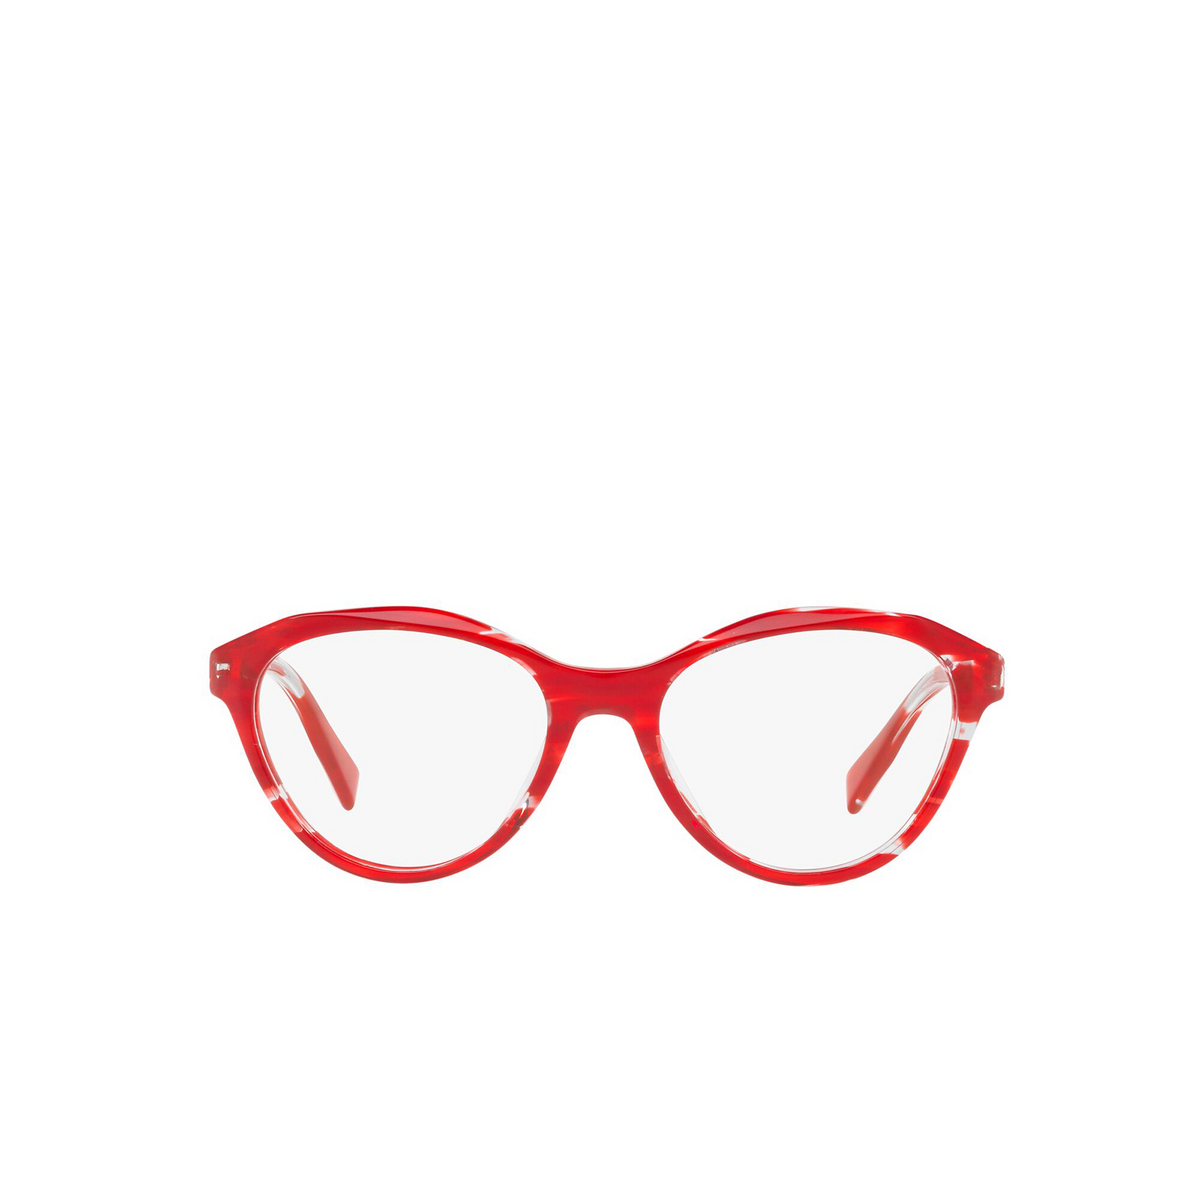 Alain Mikli® Cat-eye Eyeglasses: A03076 color Paint Red 004 - front view.